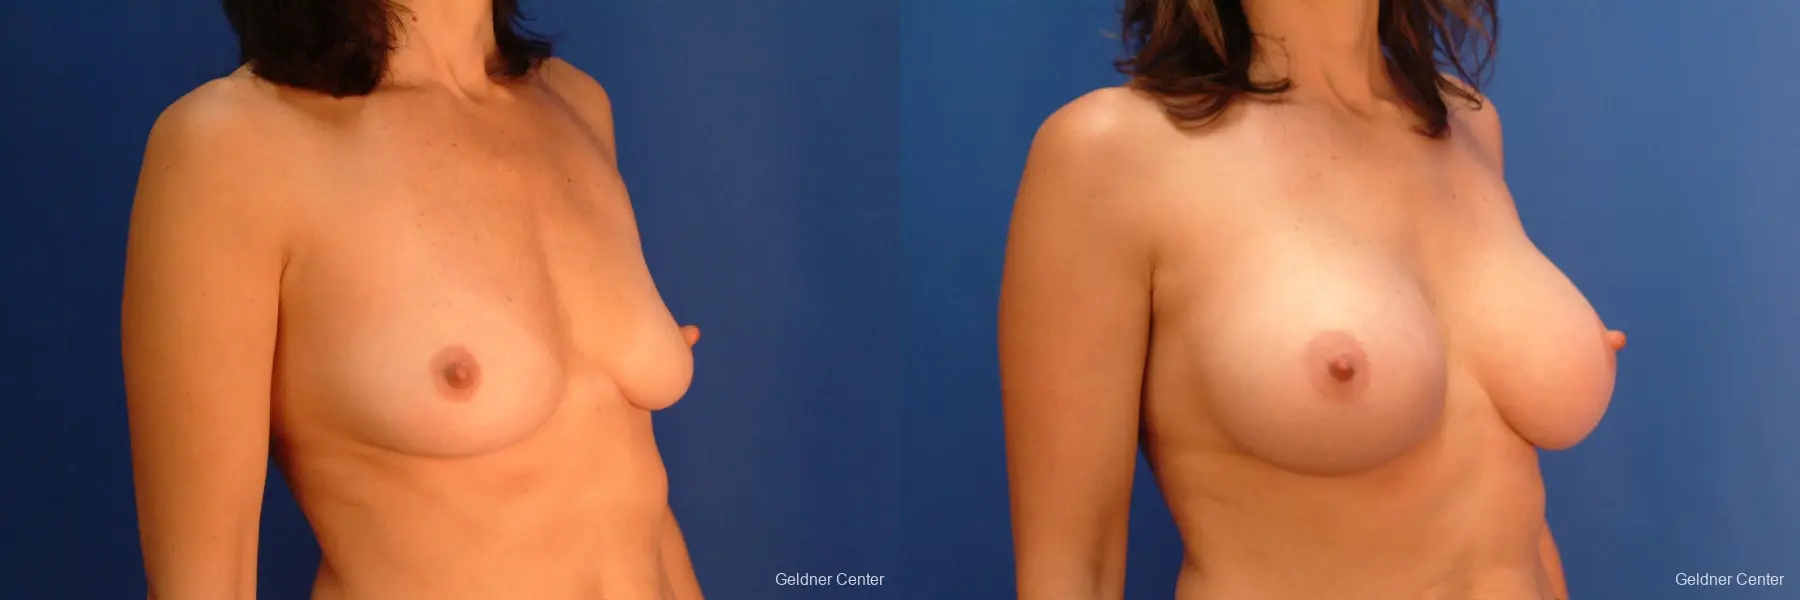 Breast Augmentation Streeterville, Chicago 2437 - Before and After 3